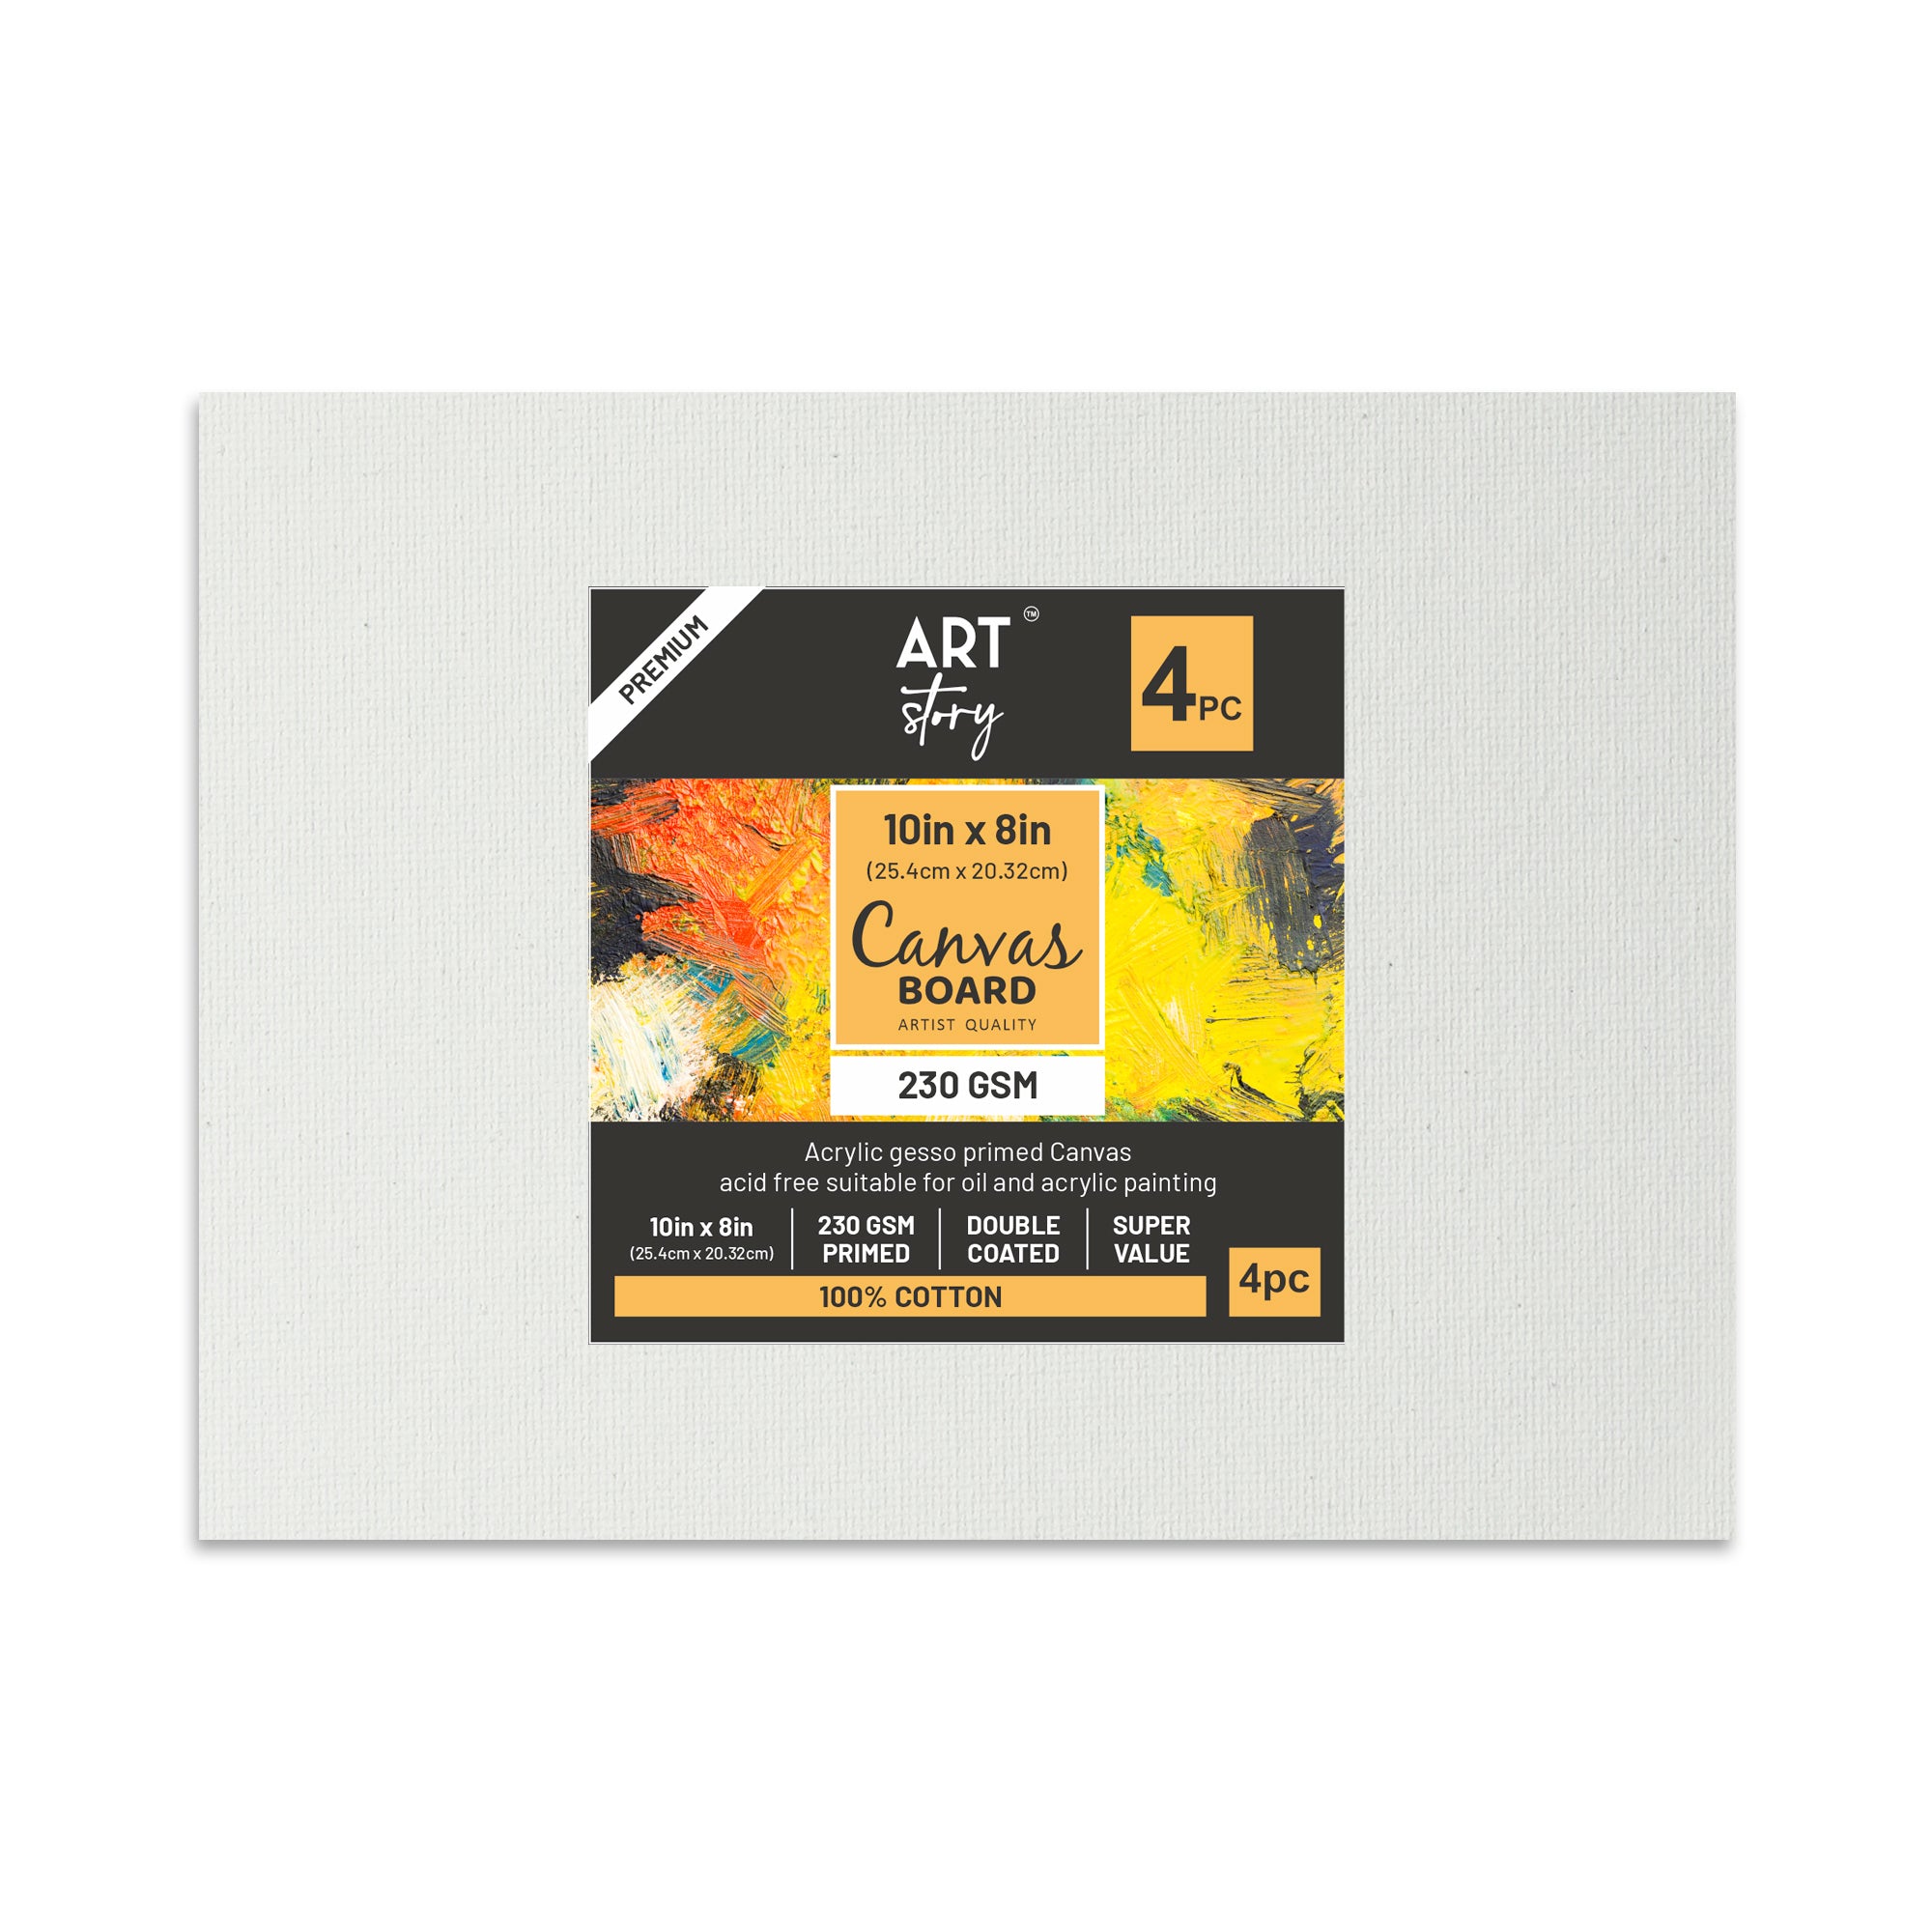 Artist Colour Mixing Palette 8 Wells 5.5 X 3.75Inch 1Pc Ib – Itsy